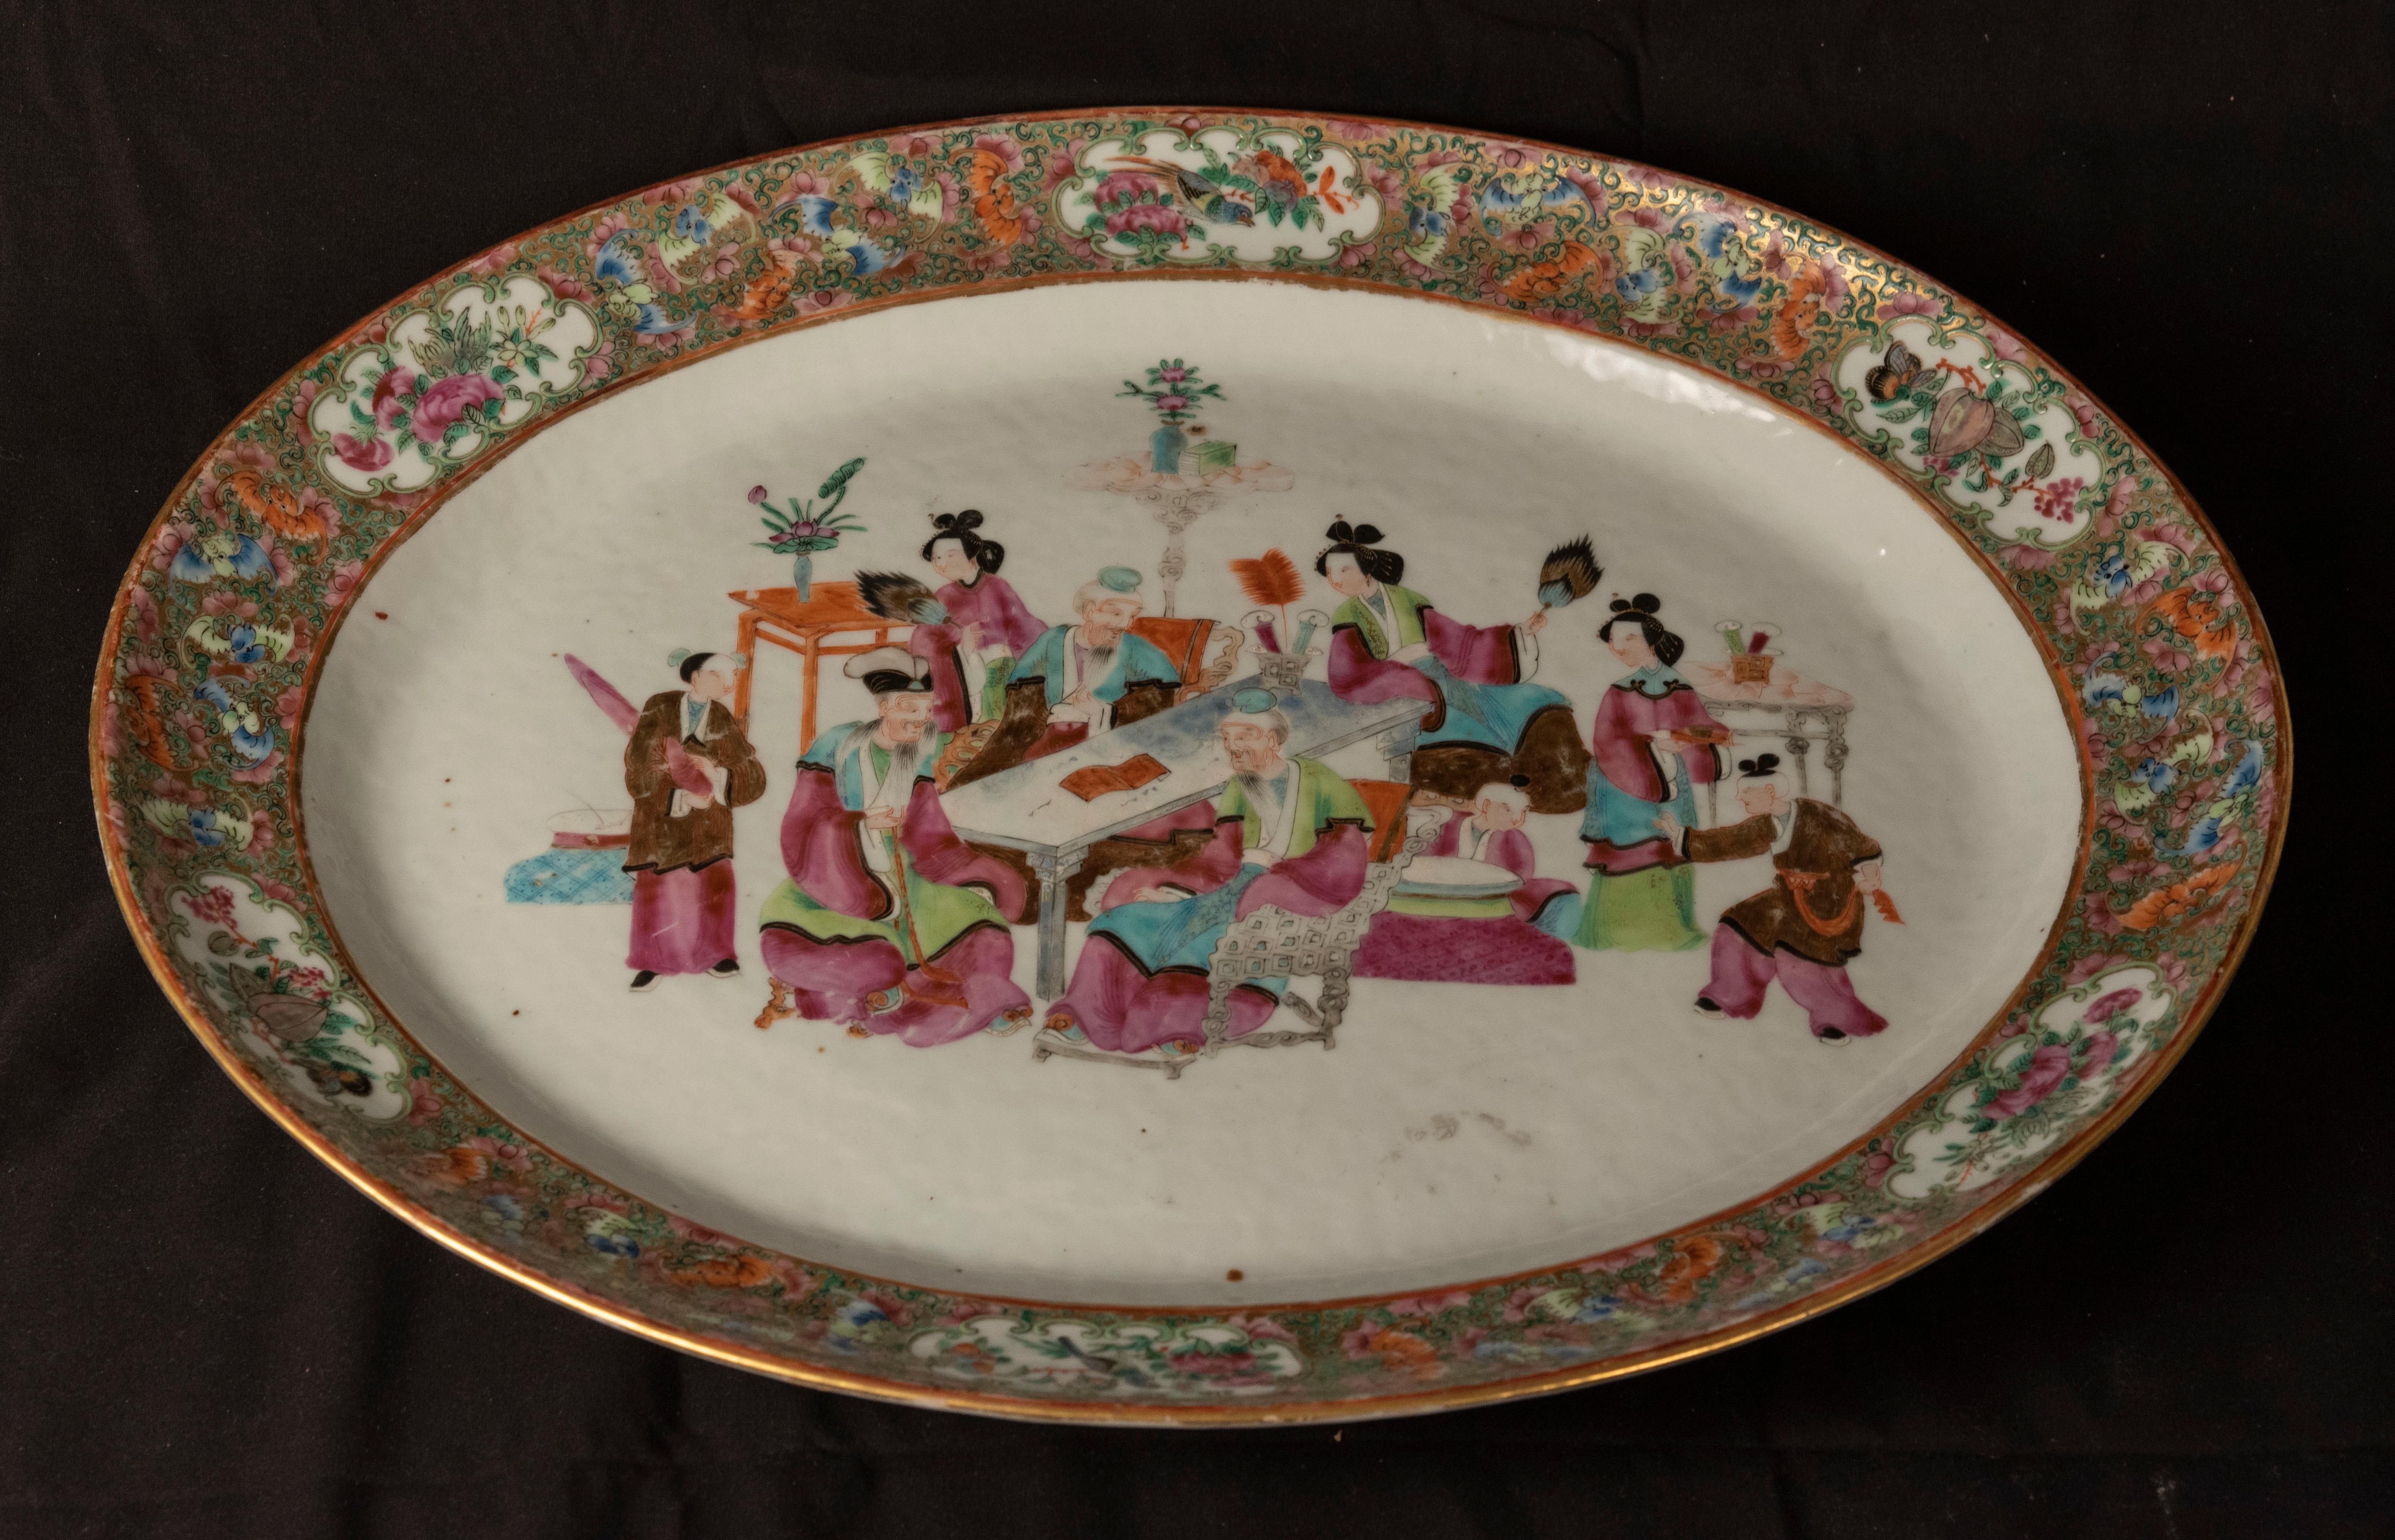 Cantonese Famille Rose porcelain charger with a masterfully painted scene of scholars and attendants, (circa 1880).

China

Measures: 15 x 18.5 x 2 in.